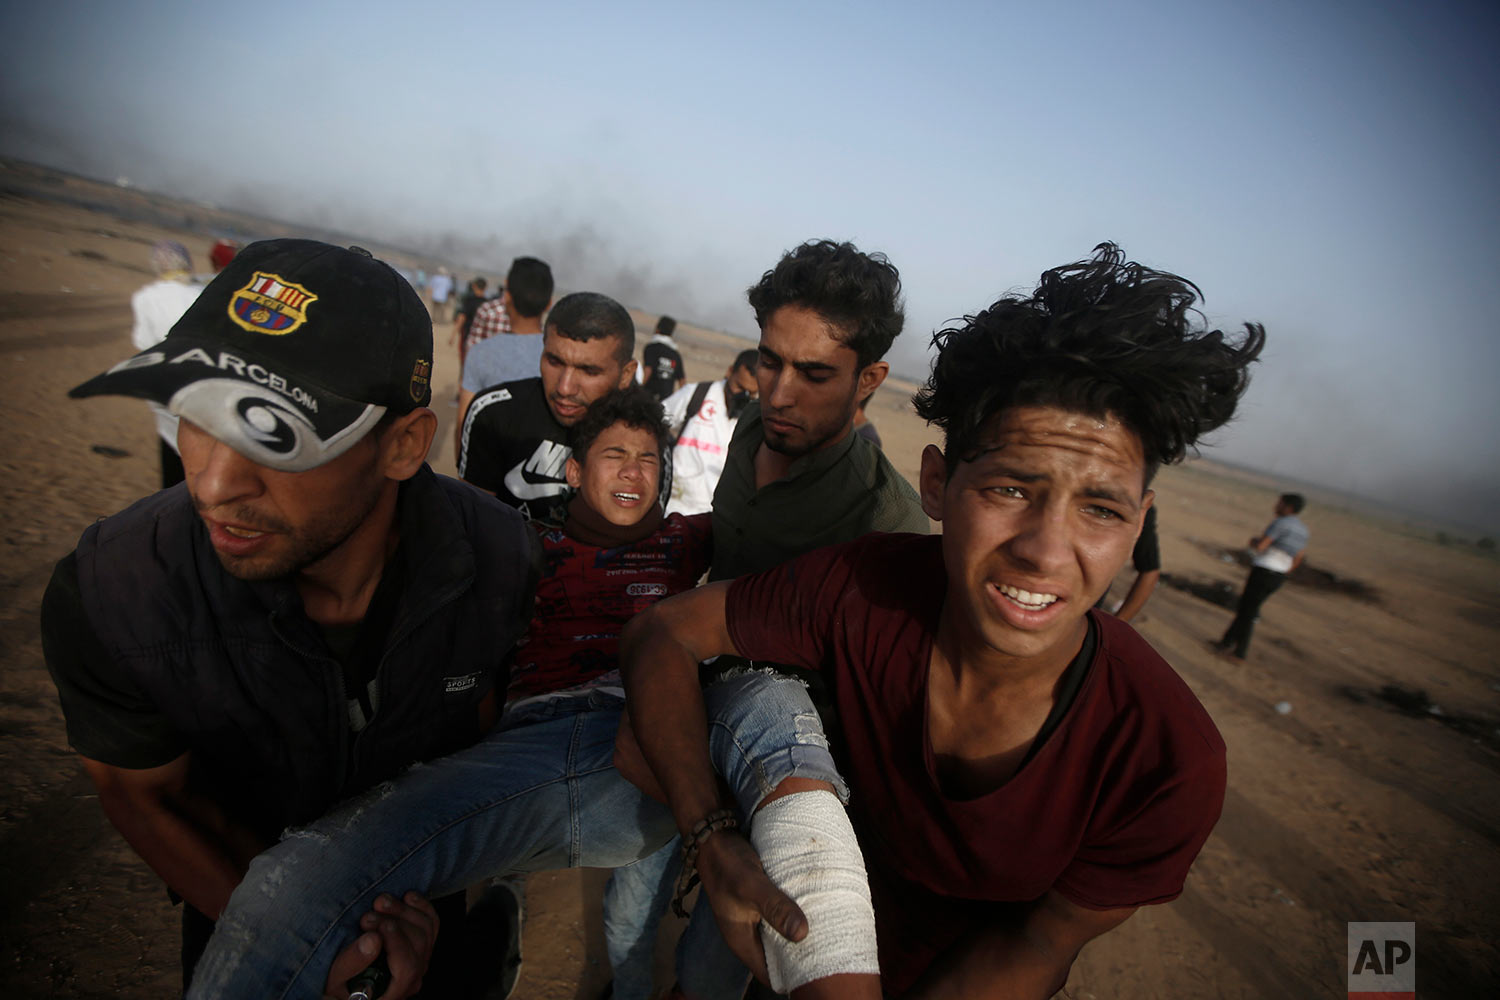  Palestinian protesters evacuate a wounded youth near the Gaza Strip's border with Israel, during east of Khan Younis, in the Gaza Strip, May 25, 2018. (AP Photo/Adel Hana) 